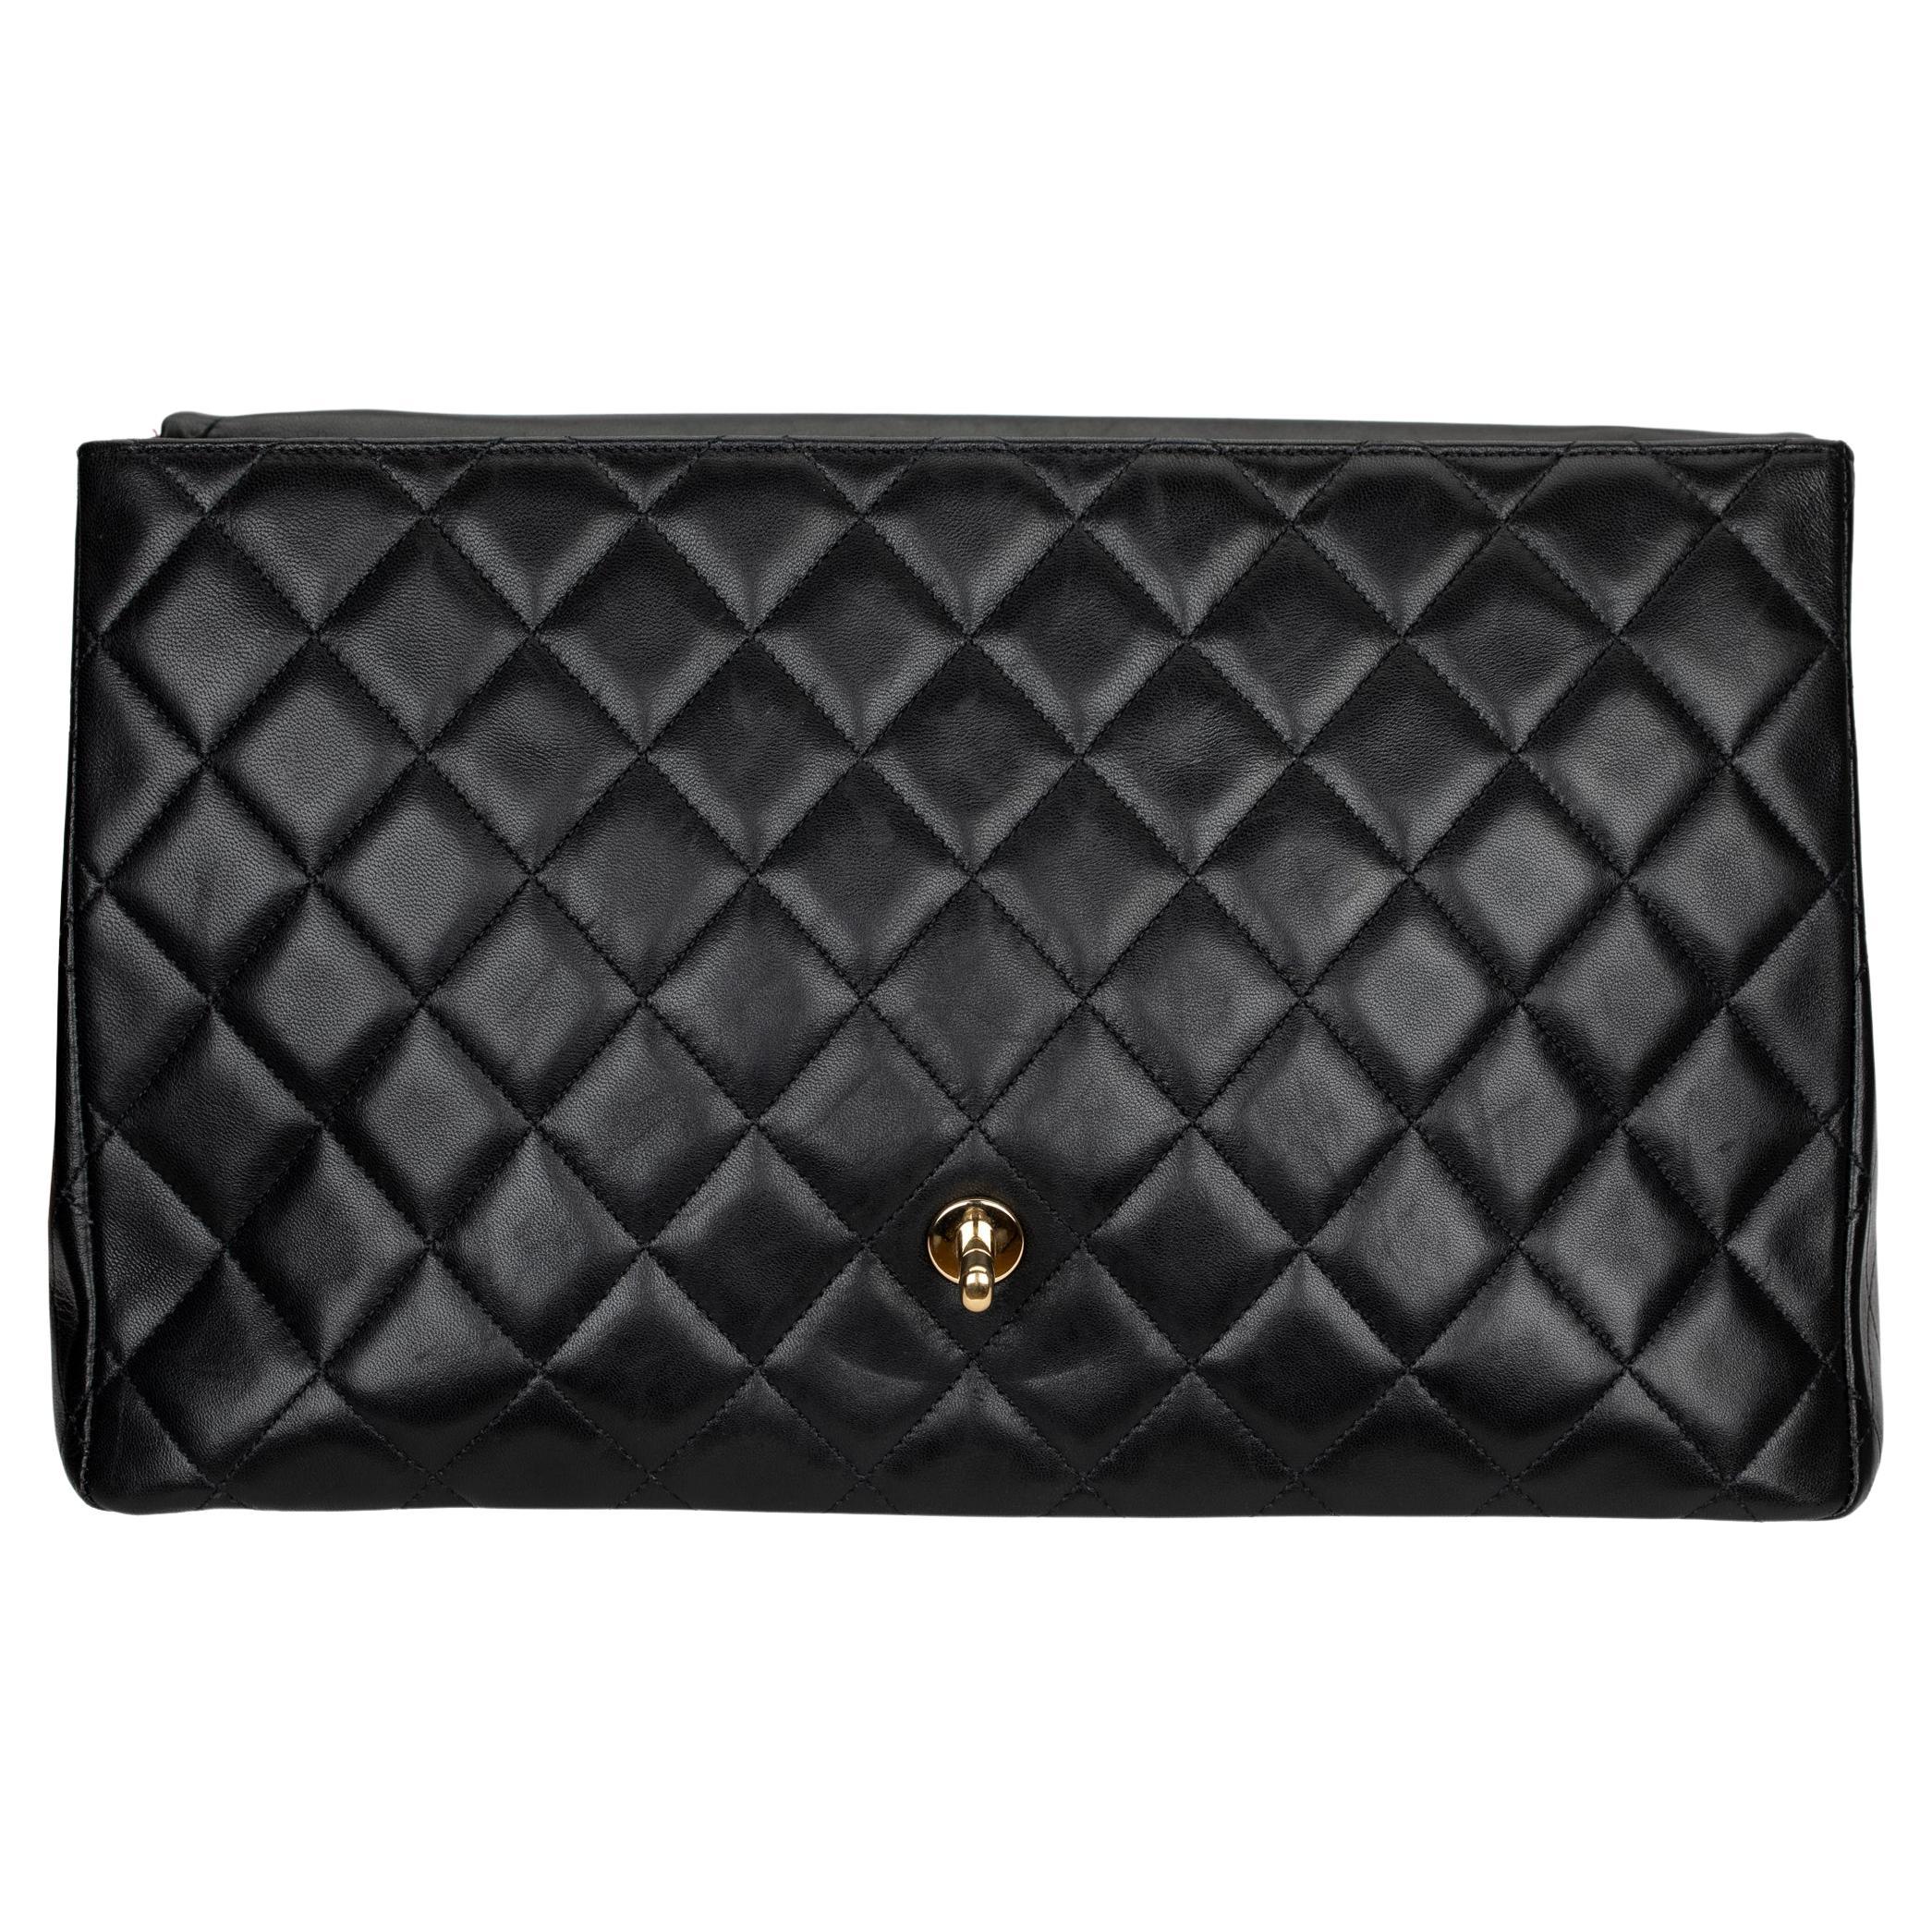 Chanel Maxi Classic Flap Black Quilted Lambskin Leather Gold-Tone Hardware 9